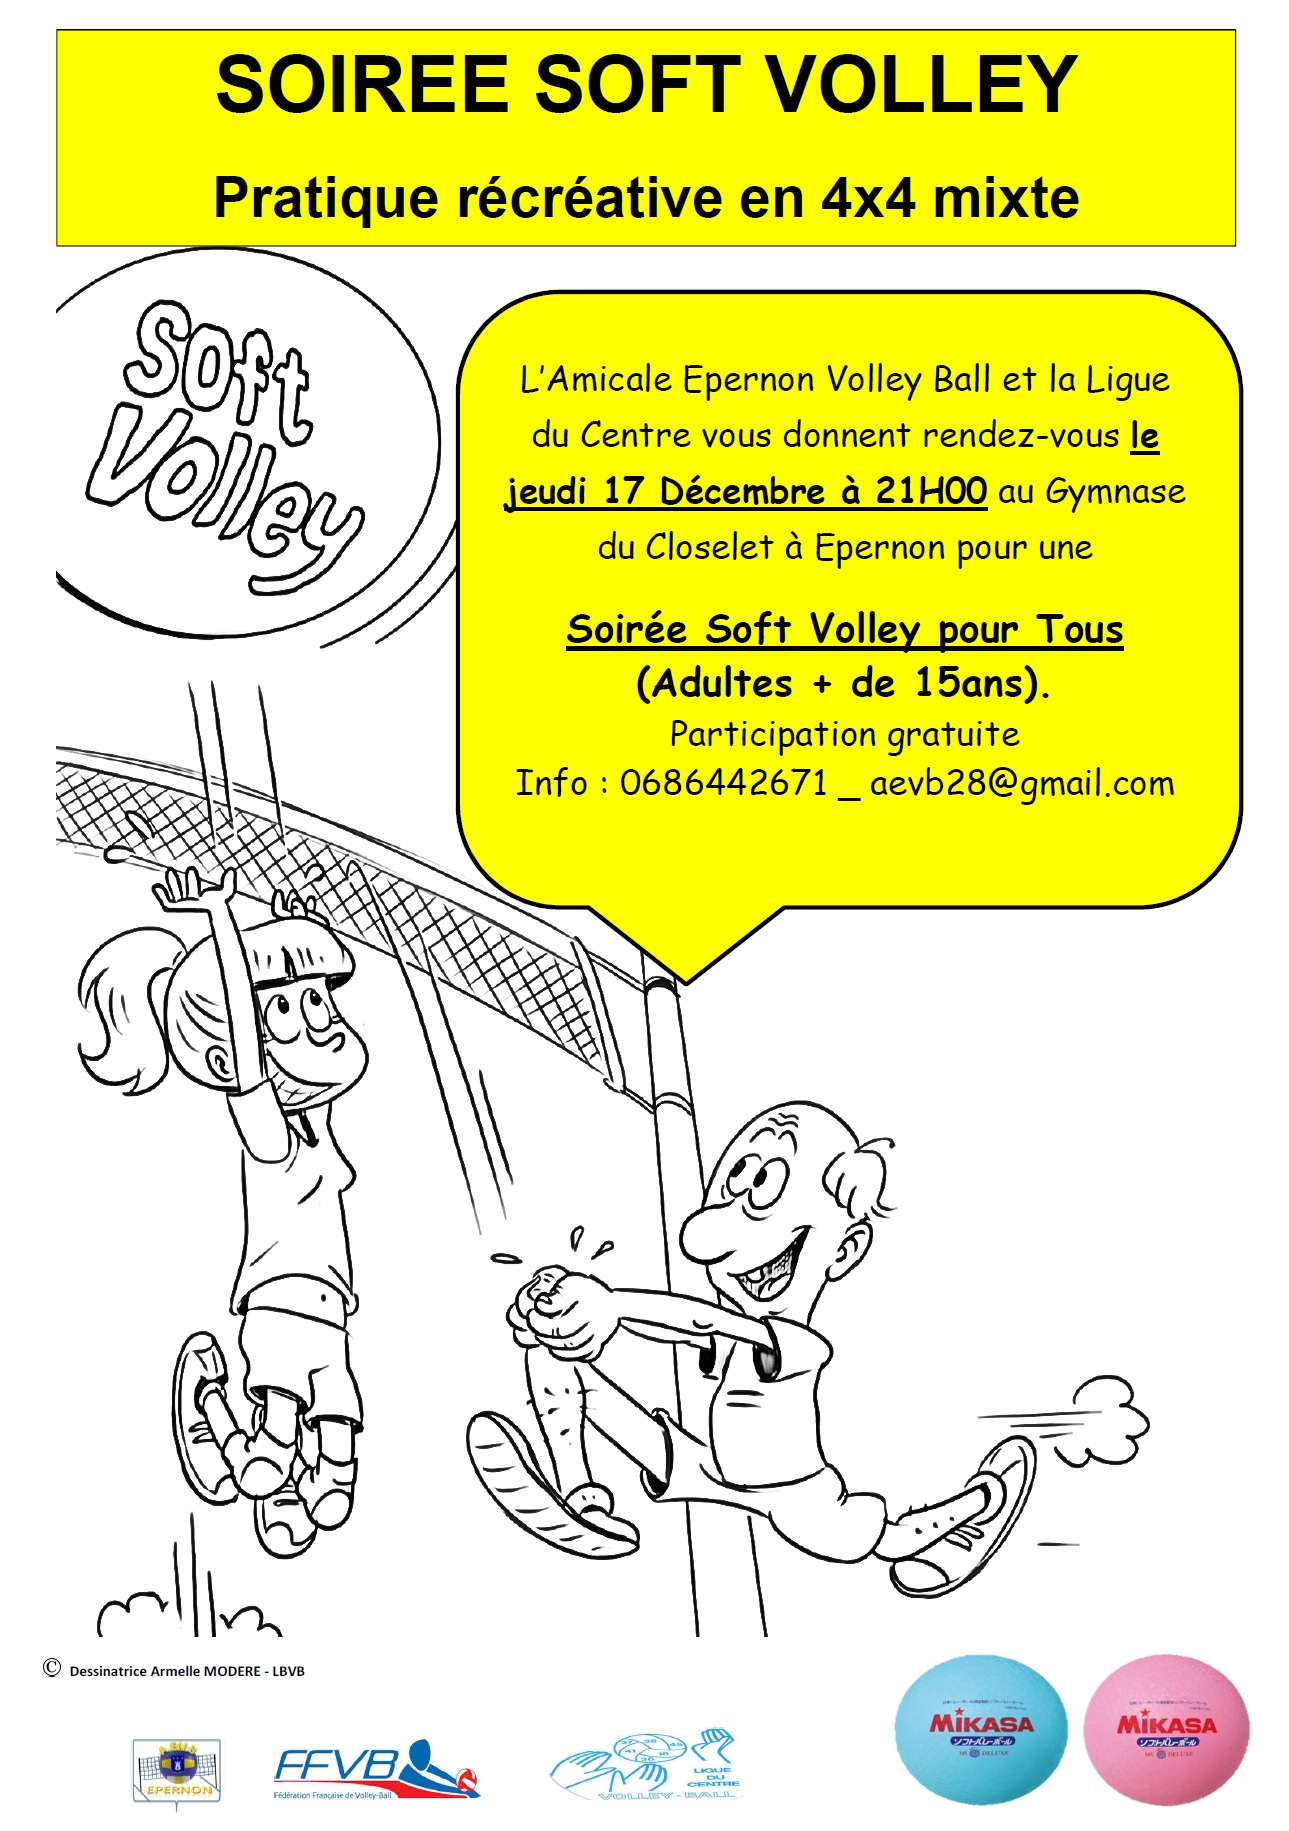 AfficheSoftVolley AmicaleEpernonVolley LigueduCentre